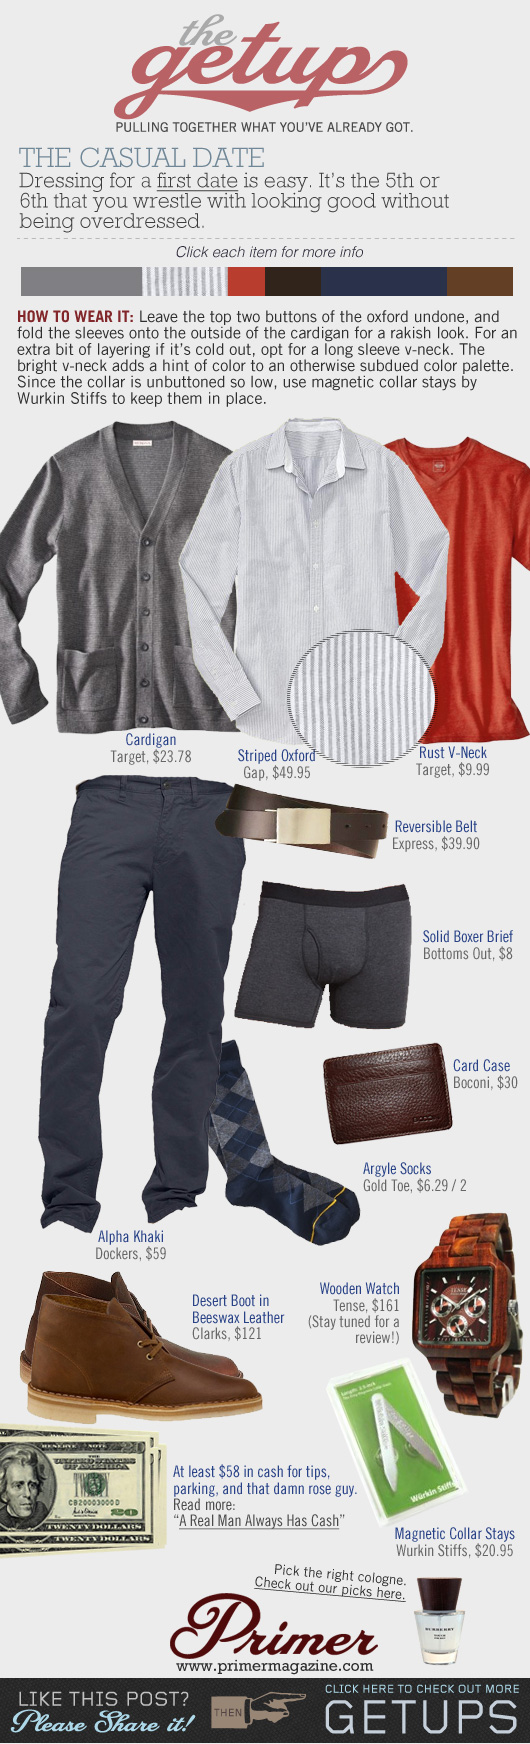 The Getup Casual Date - gray sweater, striped shirt, t-shirt, blue pants